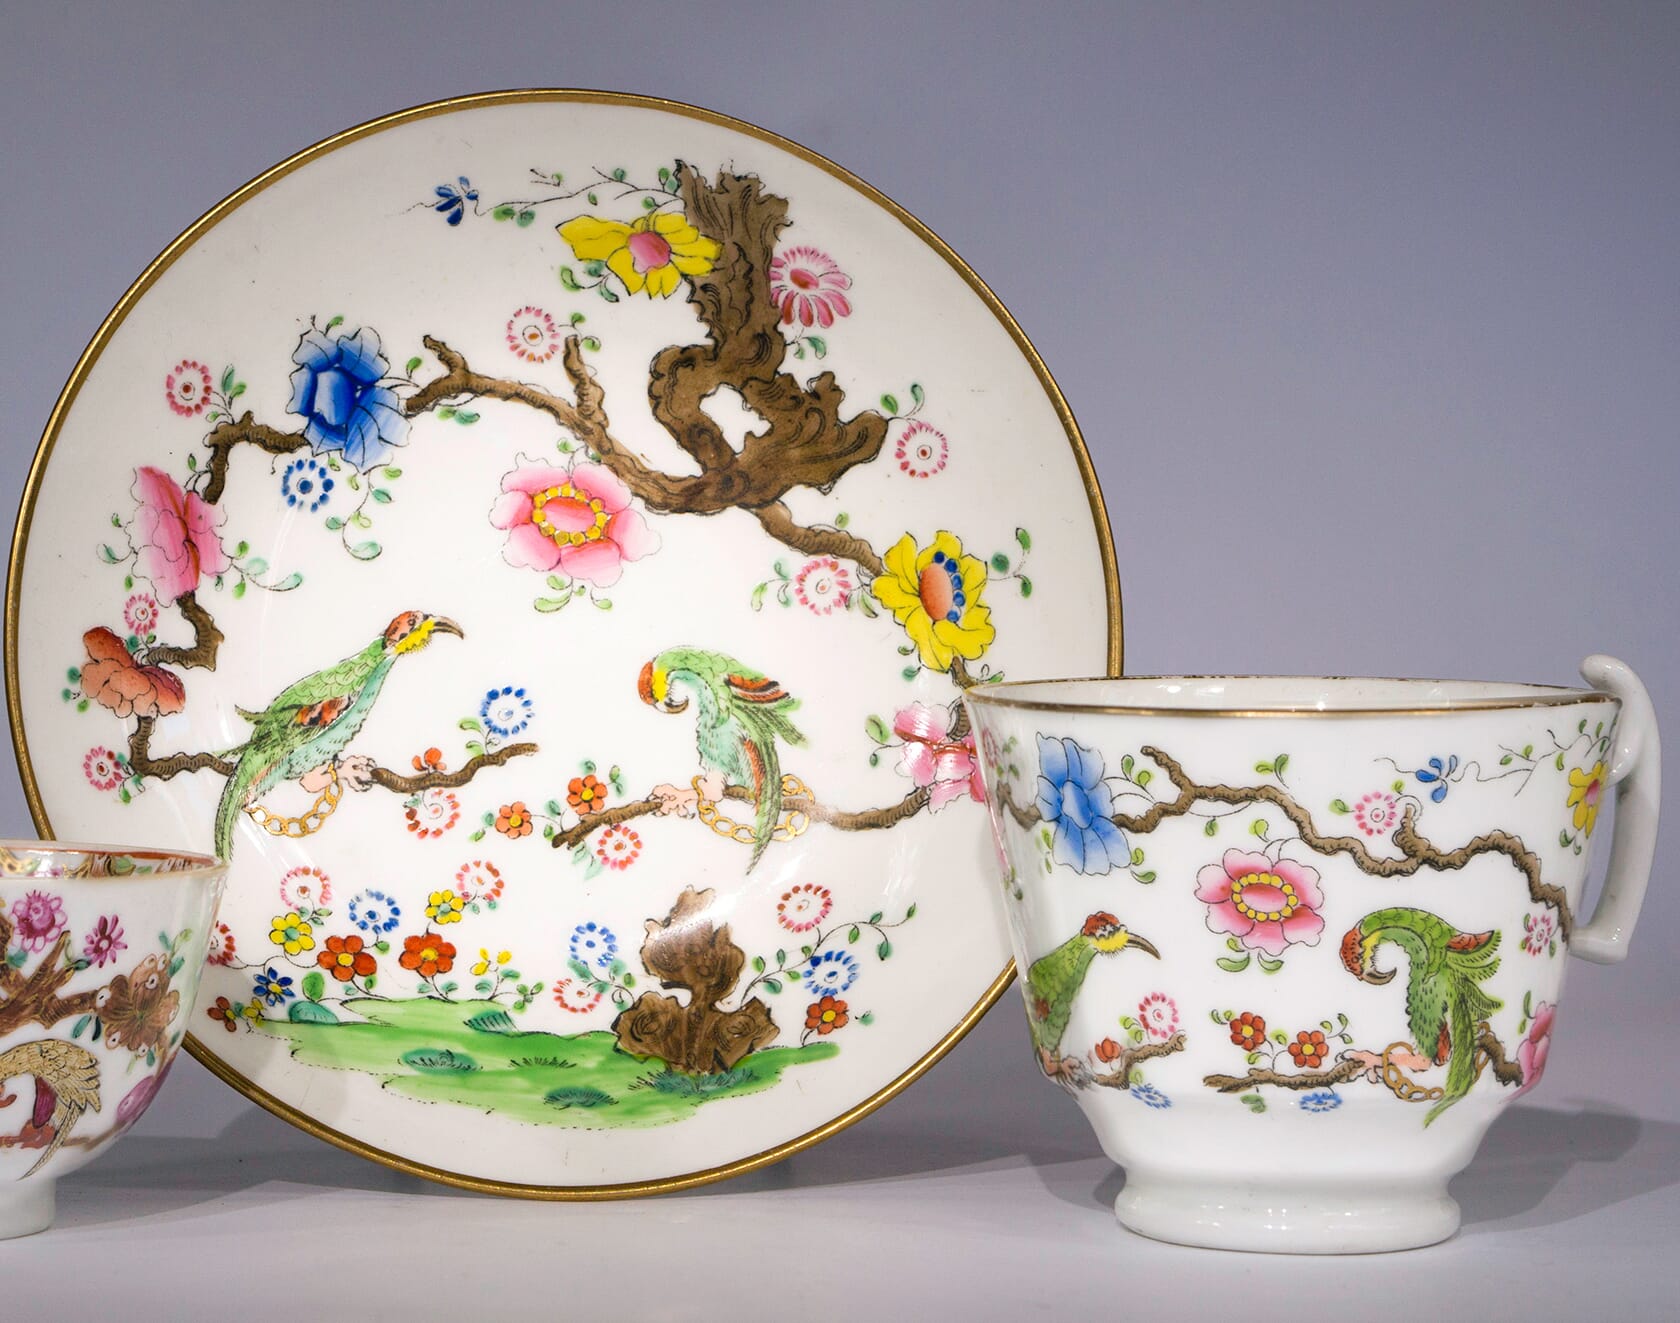 Swansea cup & saucer, Parakeets in a Tree pattern, c.1815-0